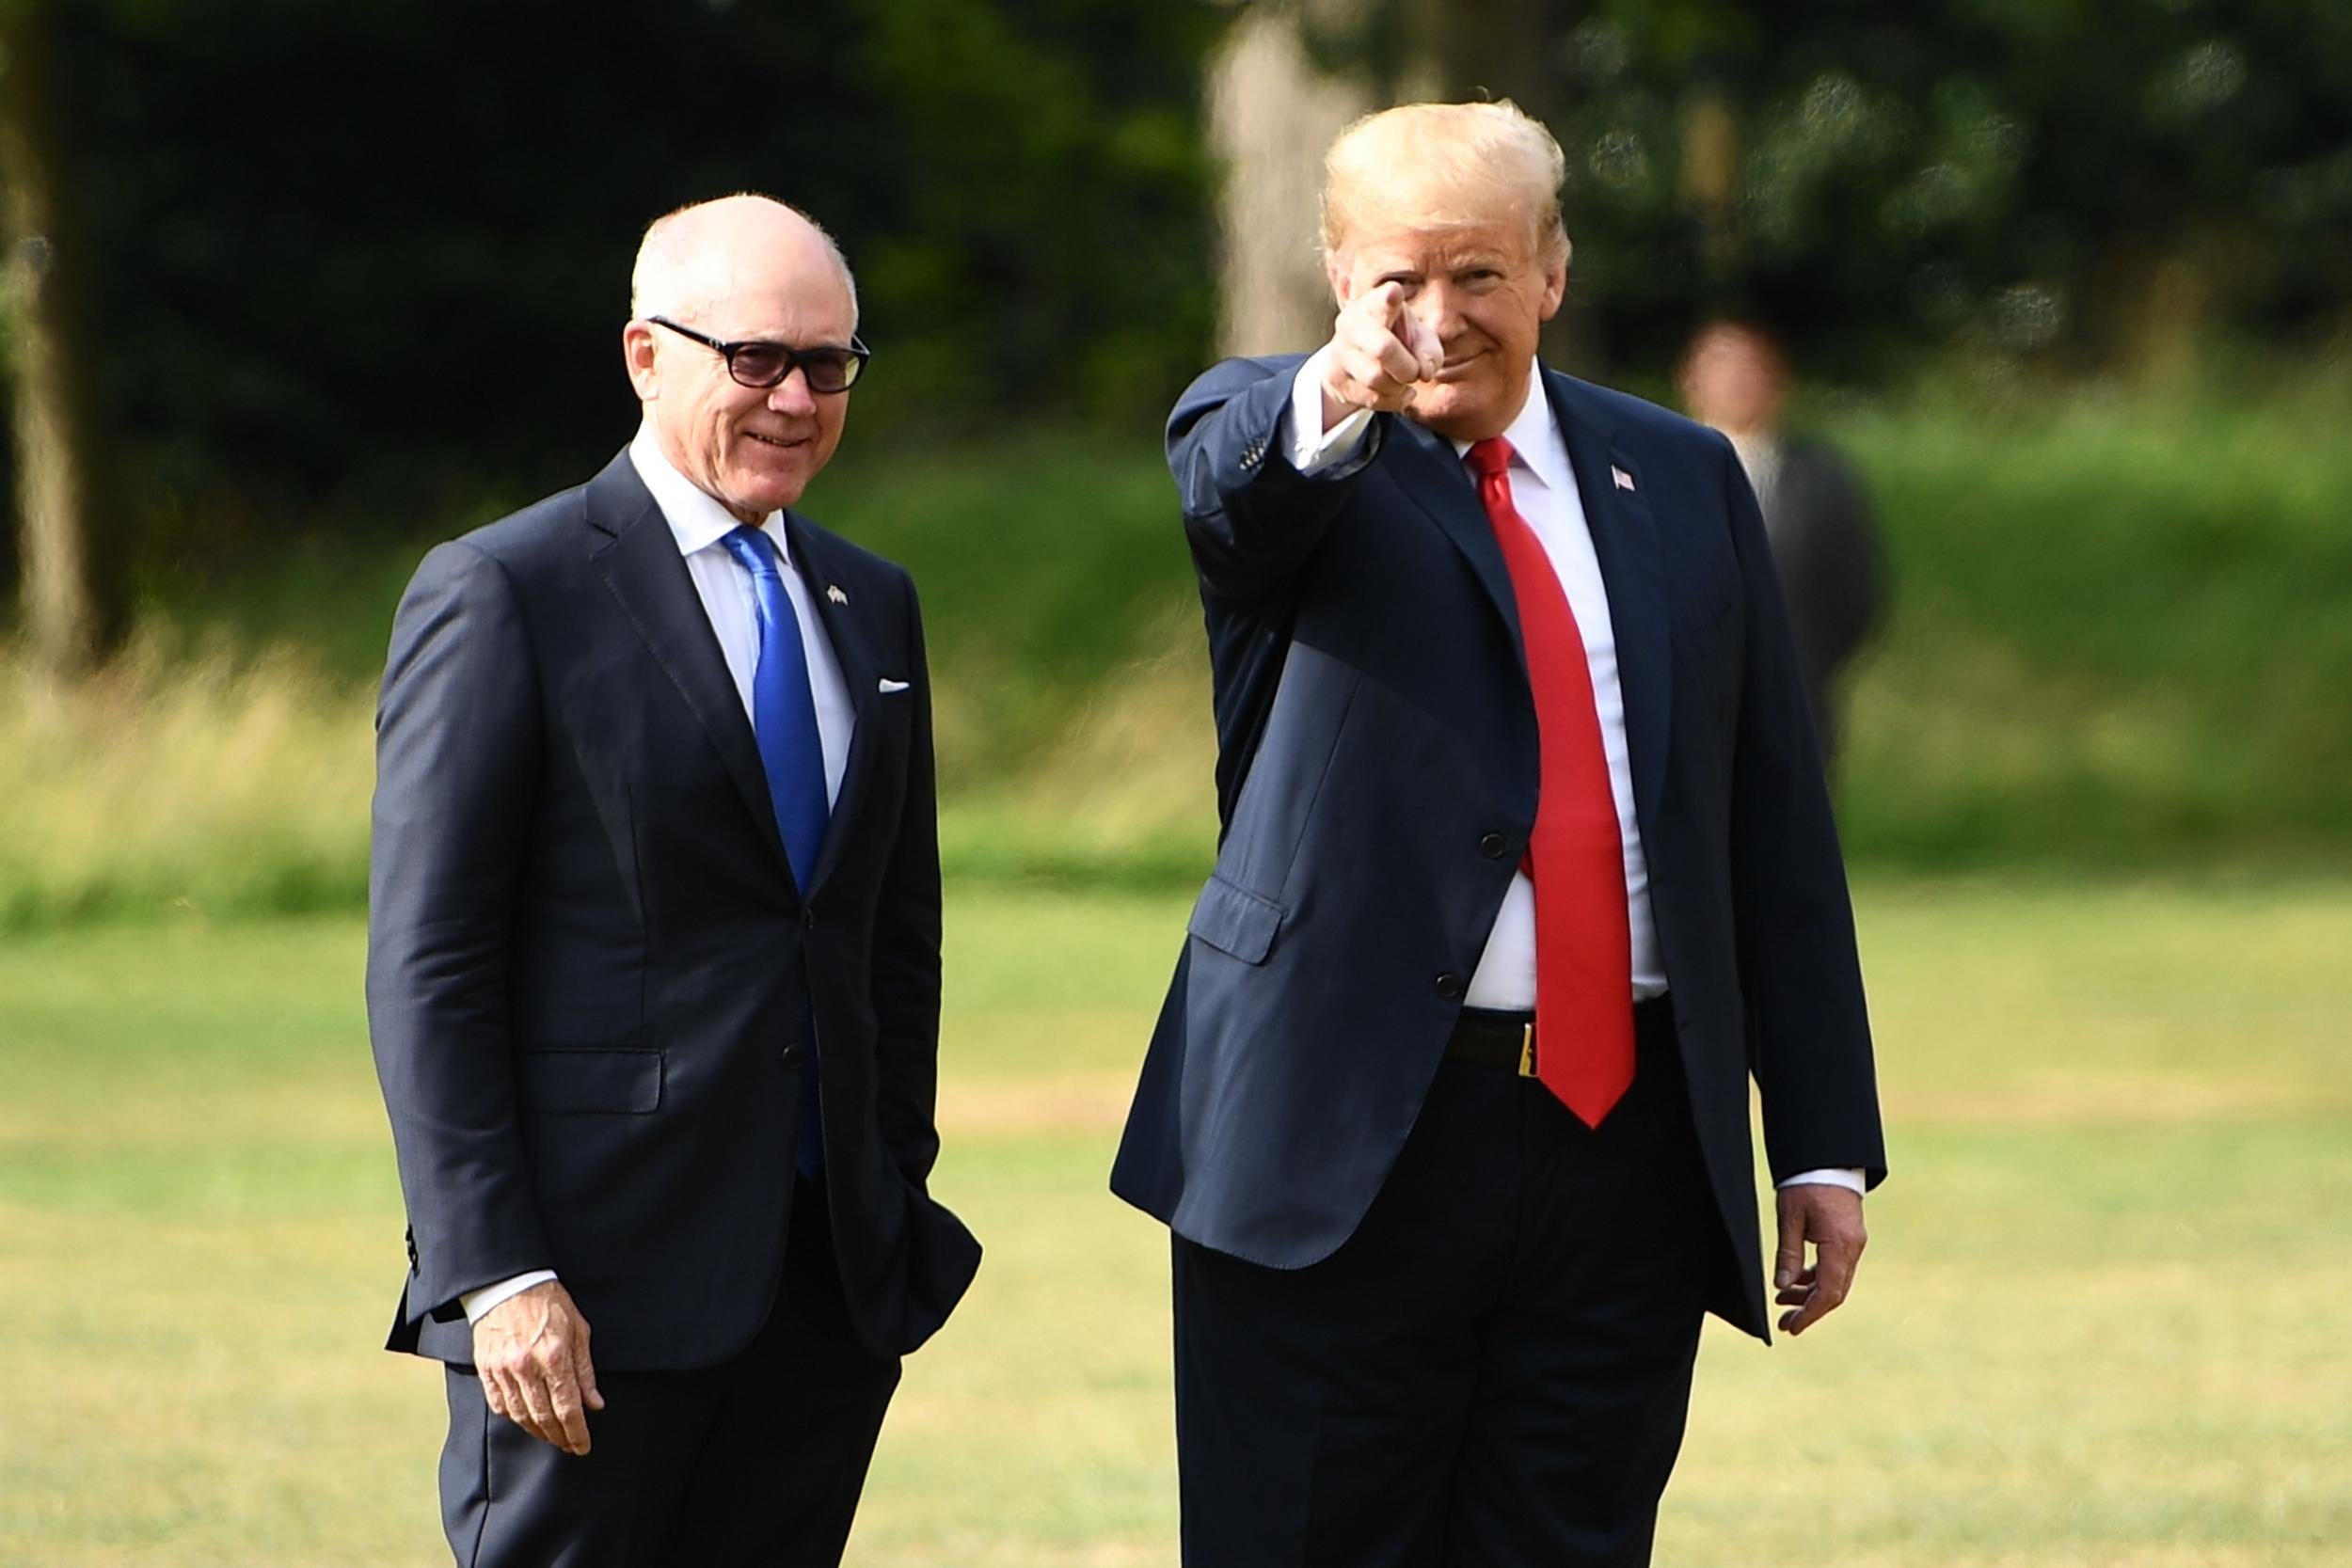 US ambassador Woody Johnson with Donald Trump during his UK visit in July